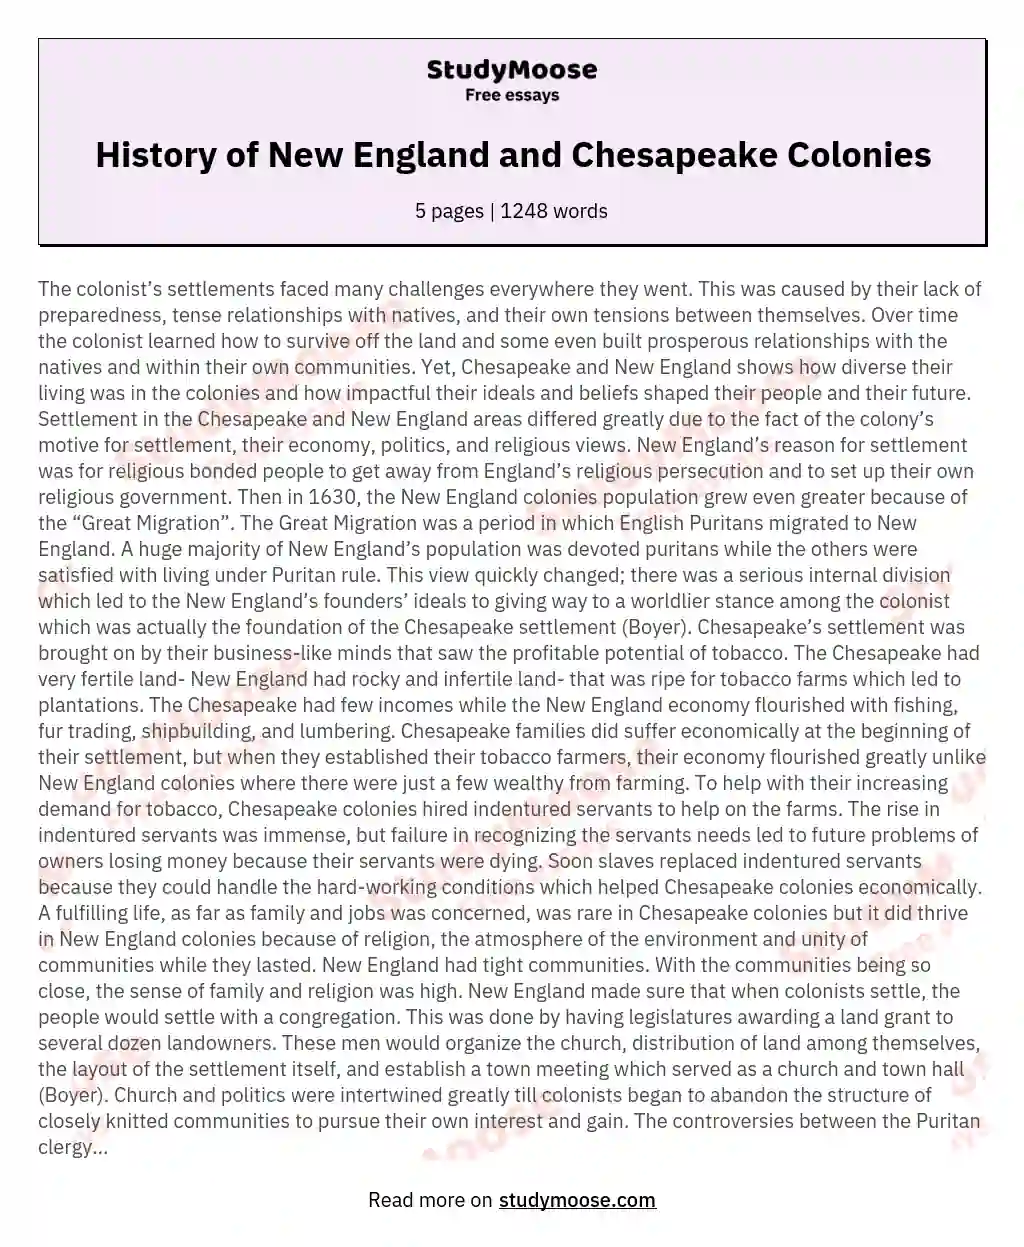 History of New England and Chesapeake Colonies